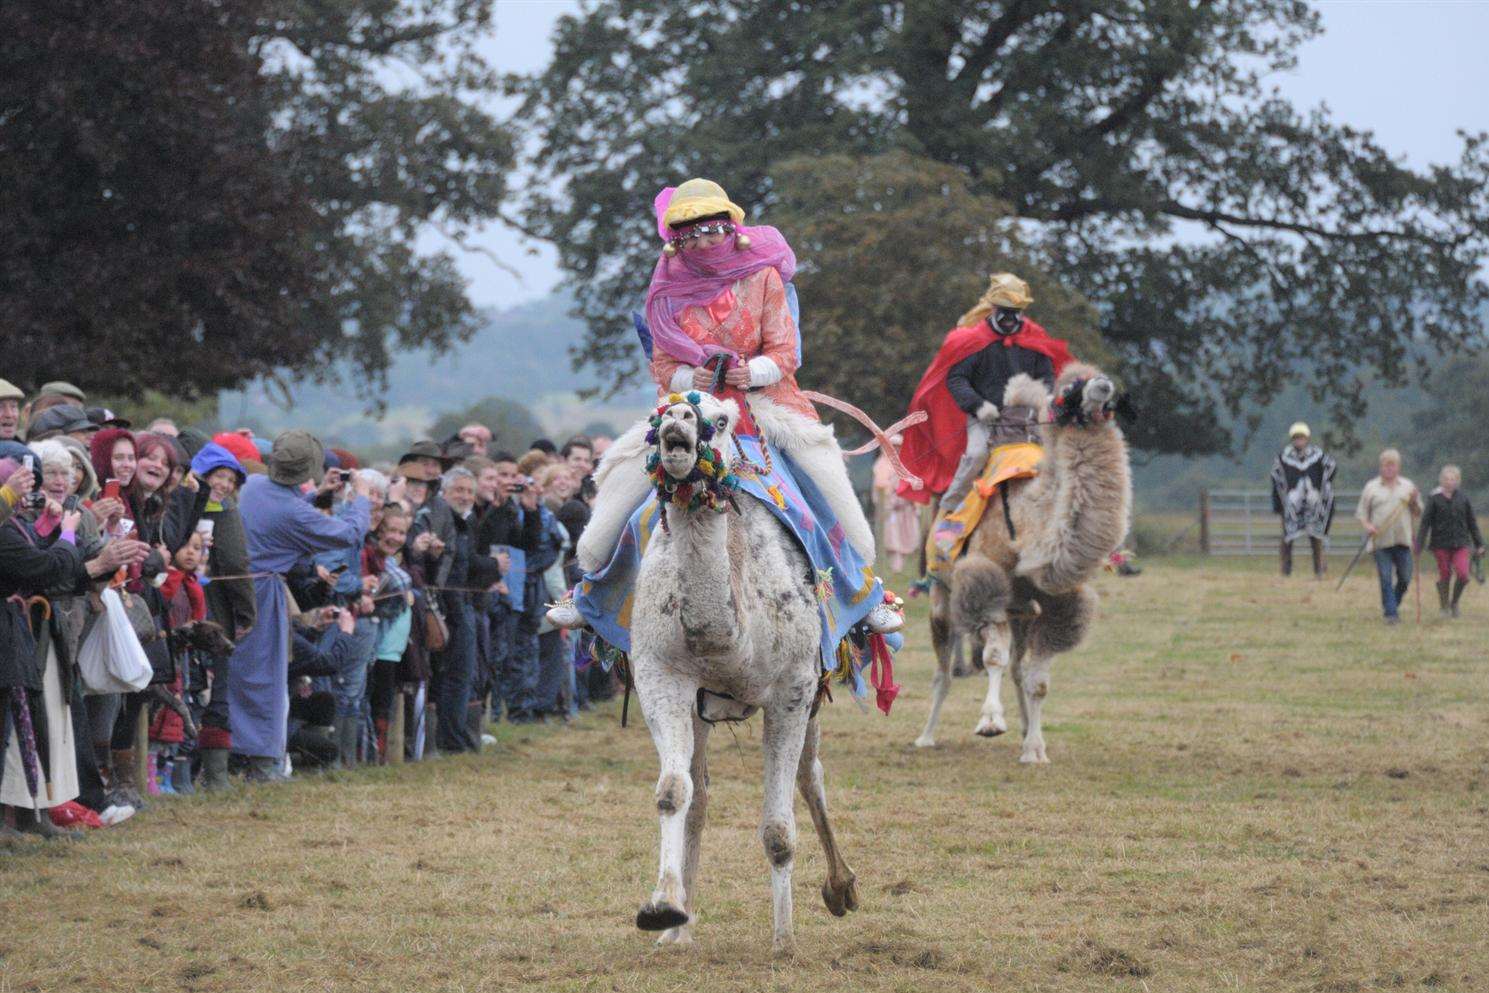 One of the camel races at Hole Park, Rolvenden